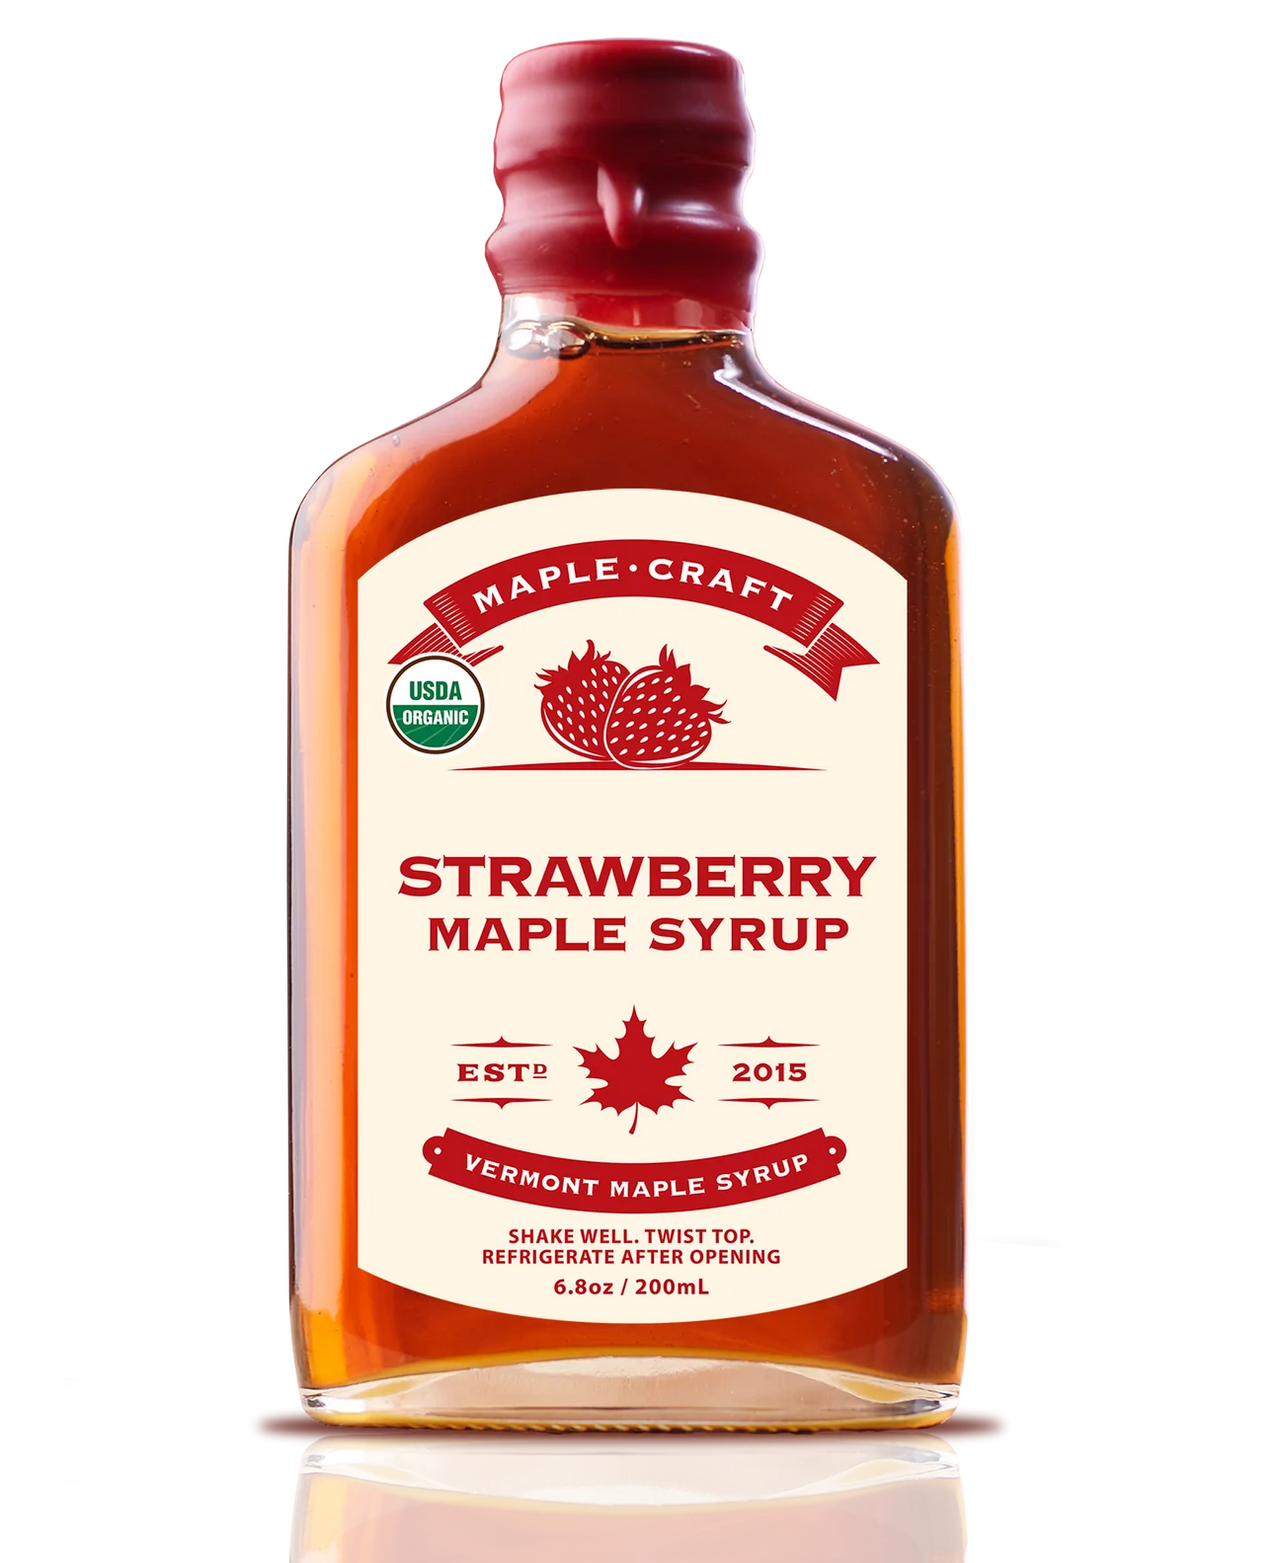 Strawberry Maple Syrup